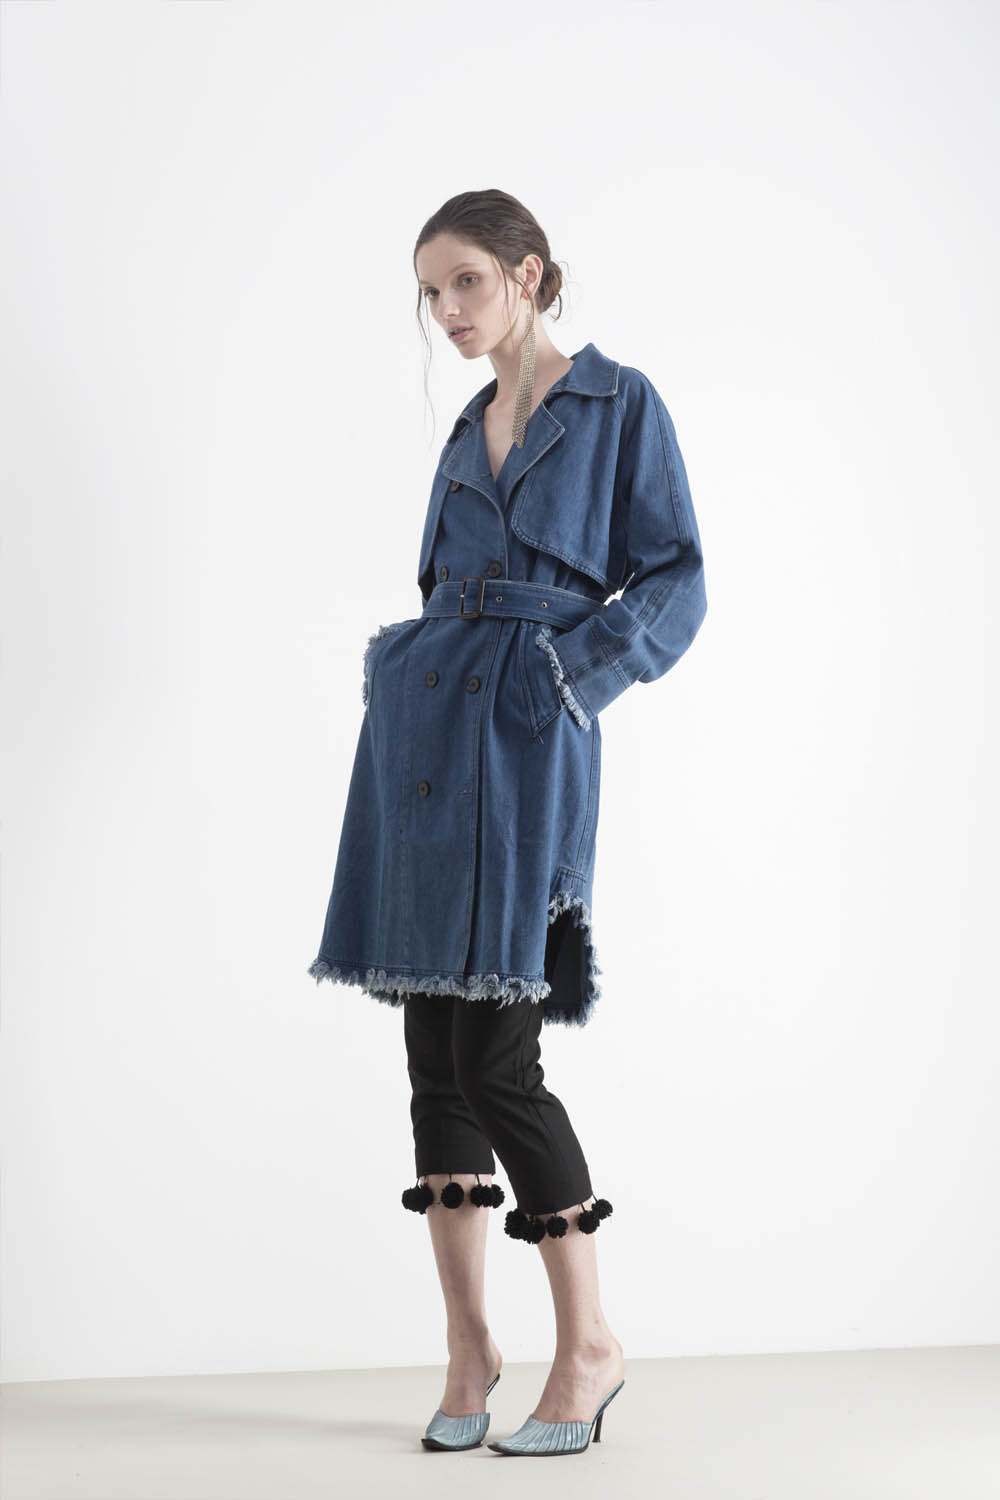 Silence Was denim trench coat, $369.